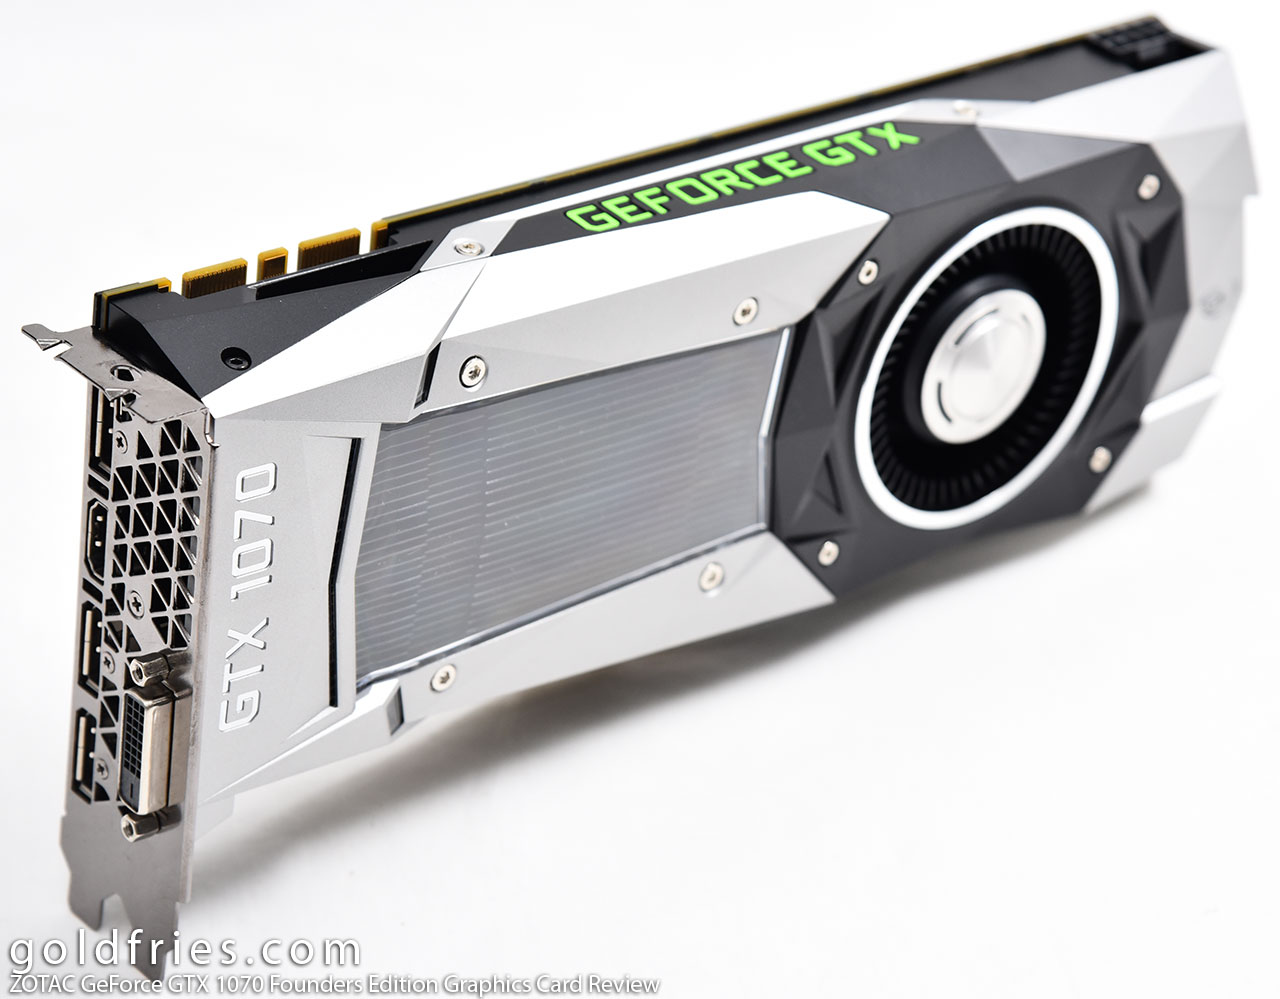 ZOTAC GeForce GTX 1070 Founders Edition Graphics Card Review ~ goldfries